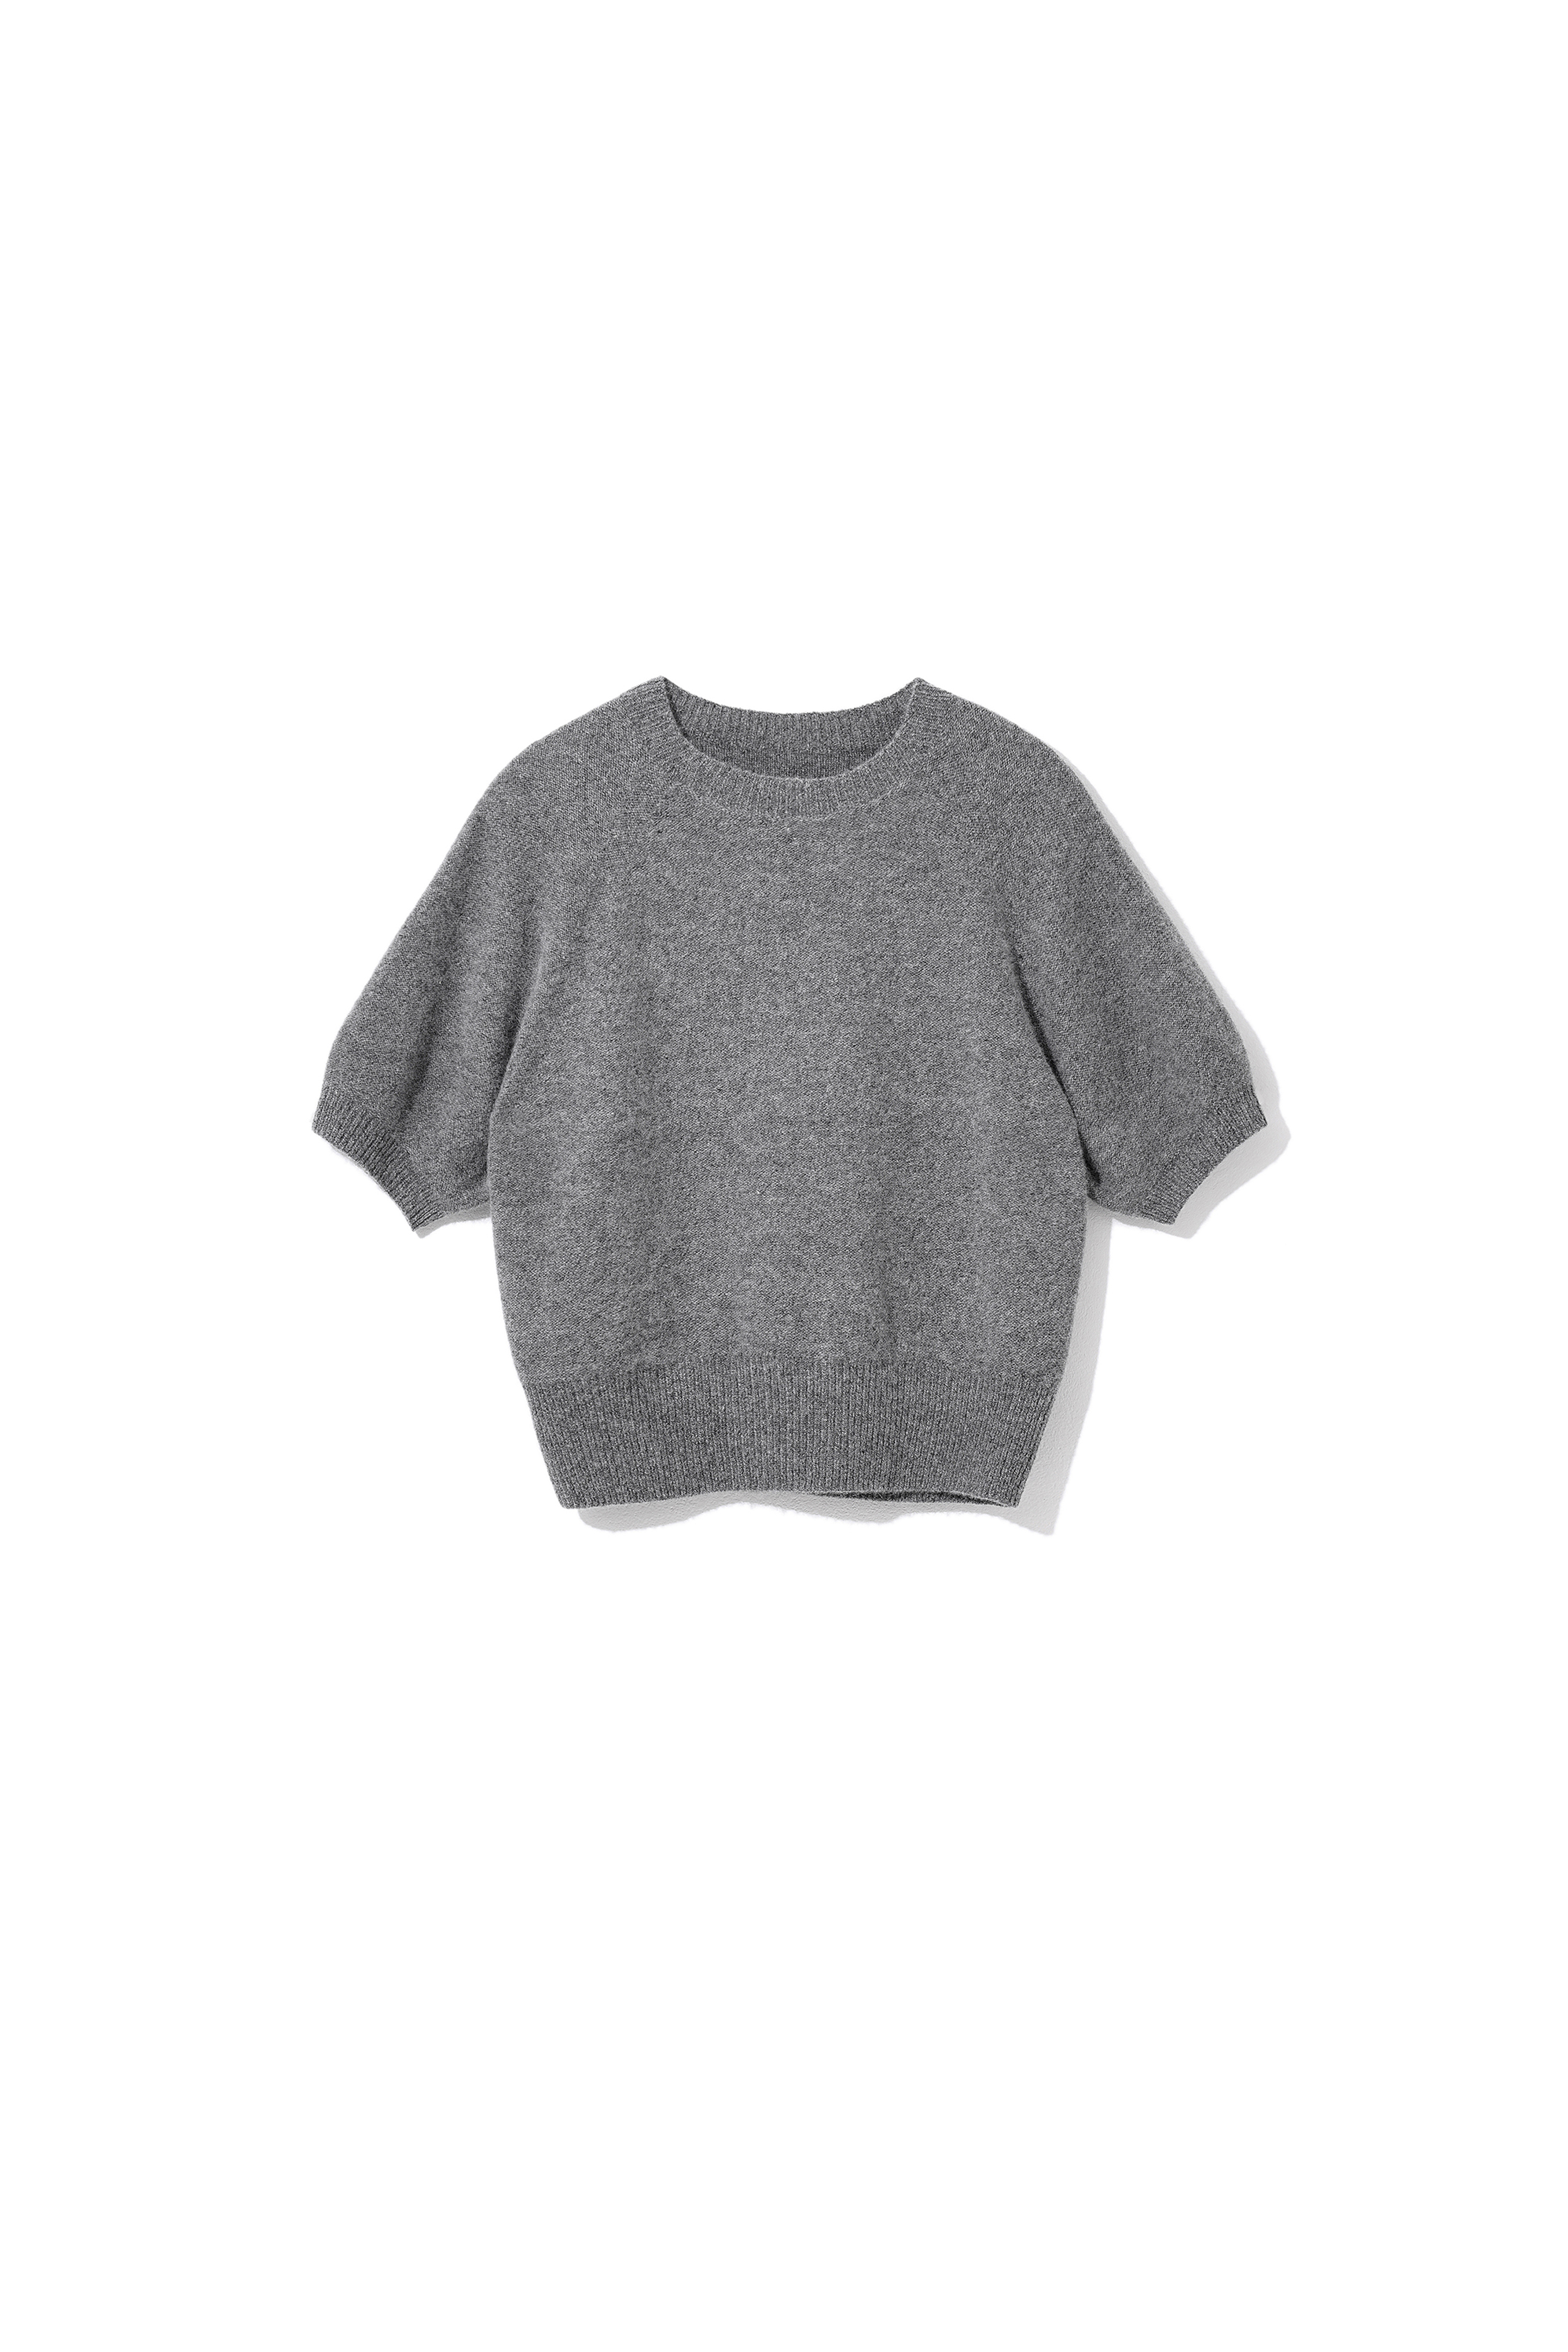 3rd) Mong Puff Sleeve Knitted P/O Grey